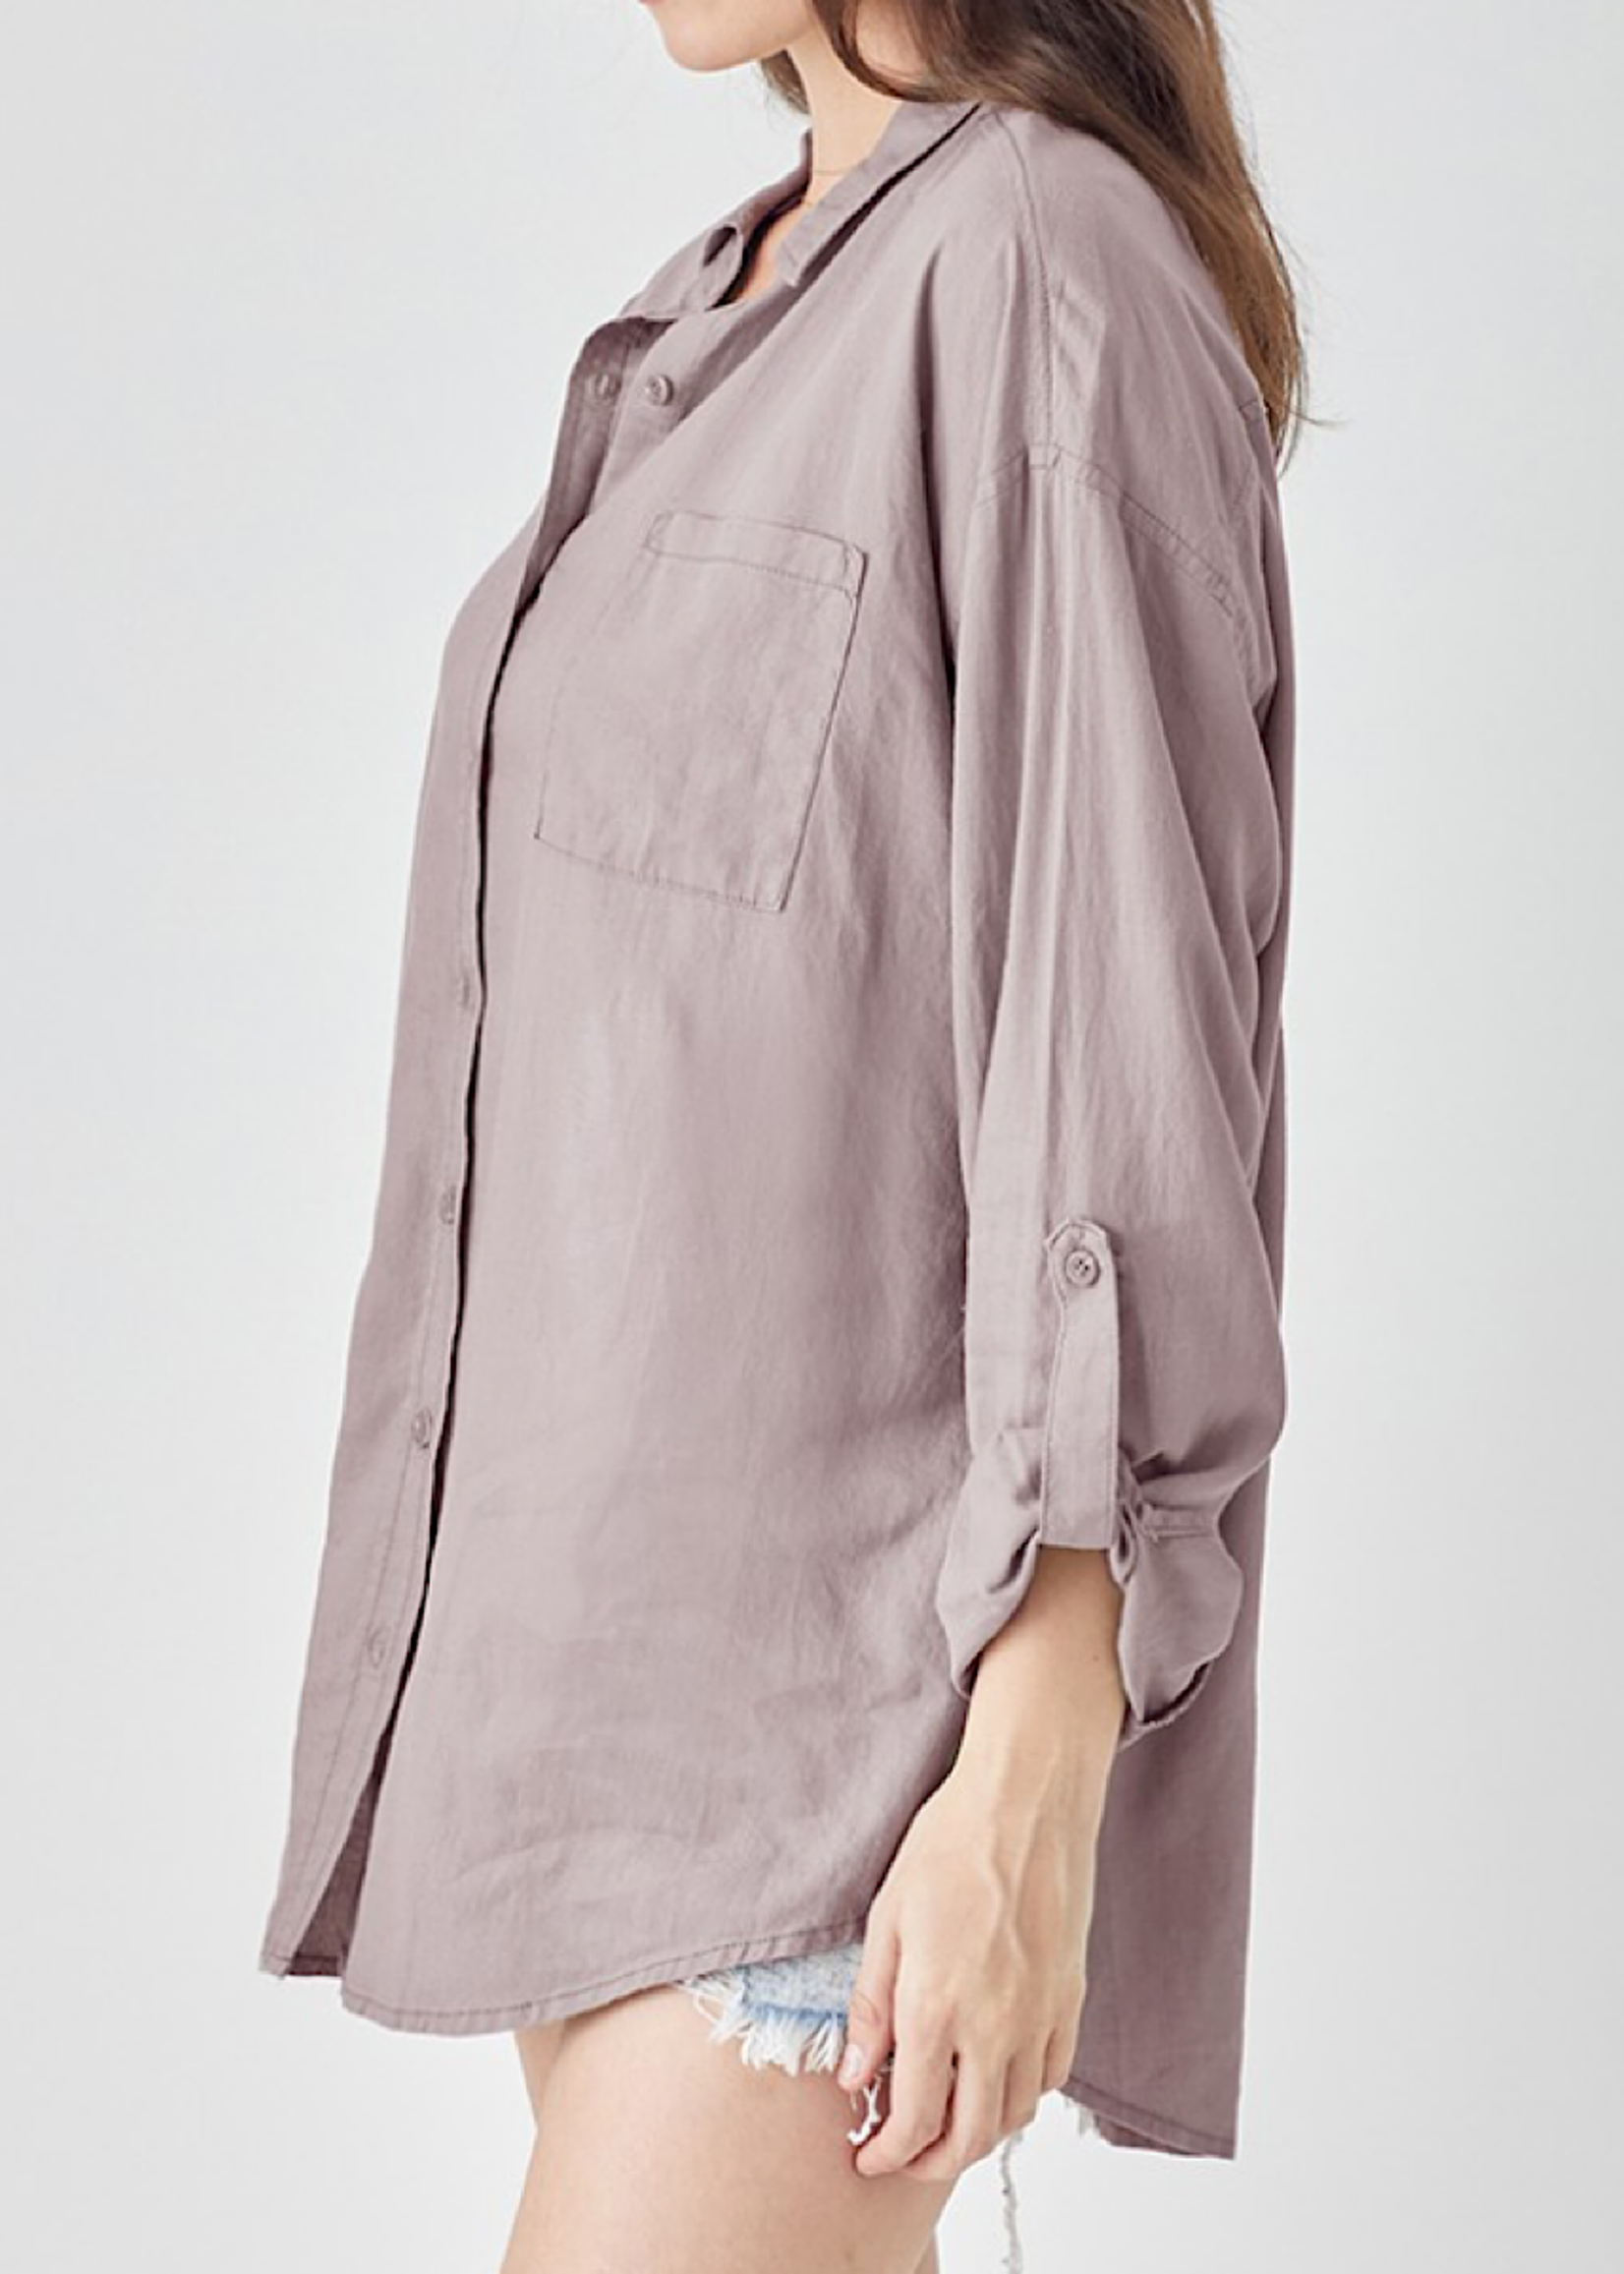 Rosy Brown Relaxed Fit Button Down Linen Shirt